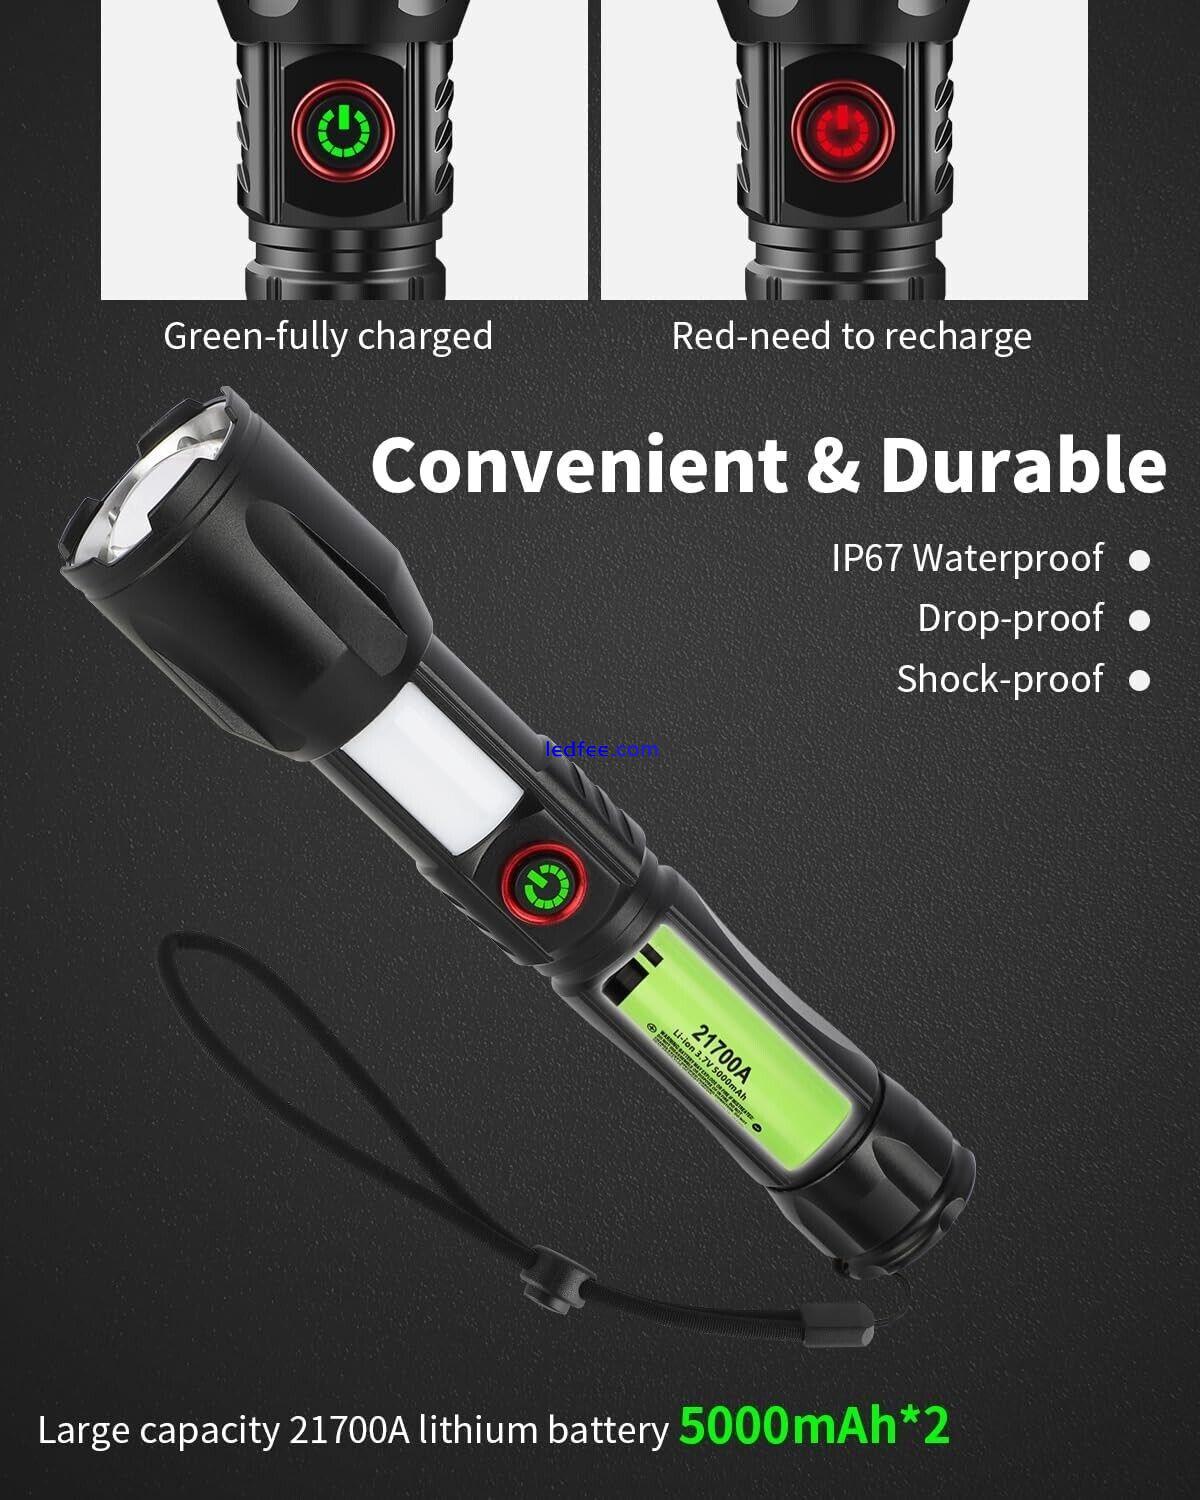 Led Torch 10000 Lumens Super Bright Zoomable Rechargeable 5 Modes Flashlight 4 